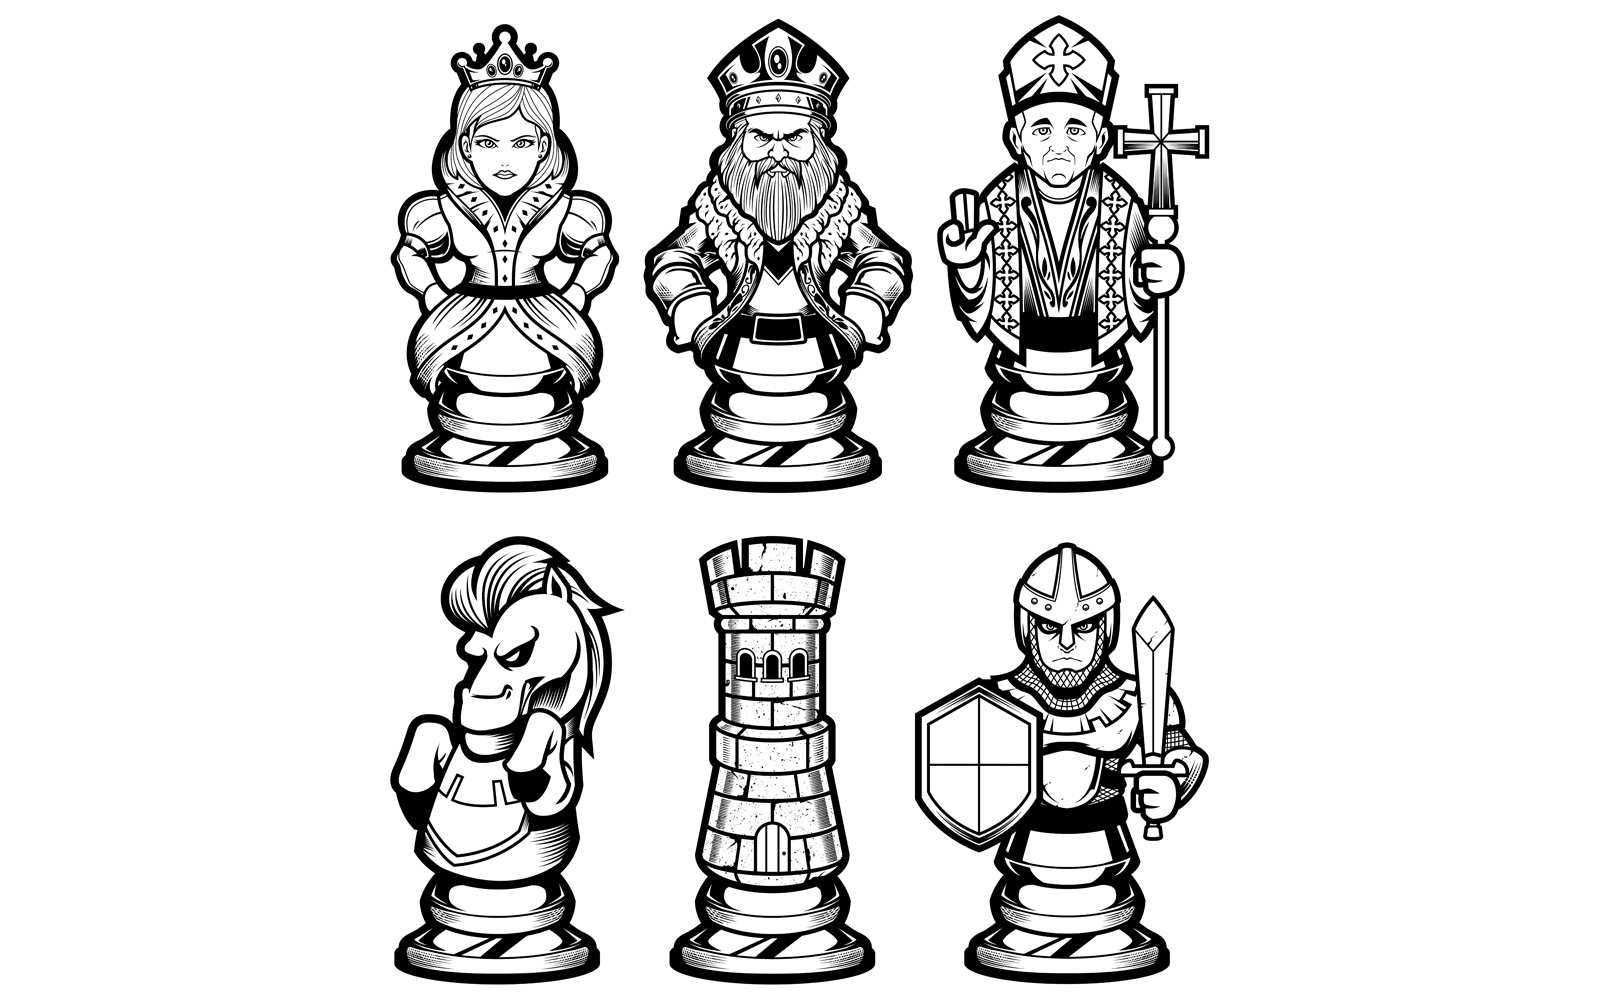 Chess Pieces Set Black and White - Illustration